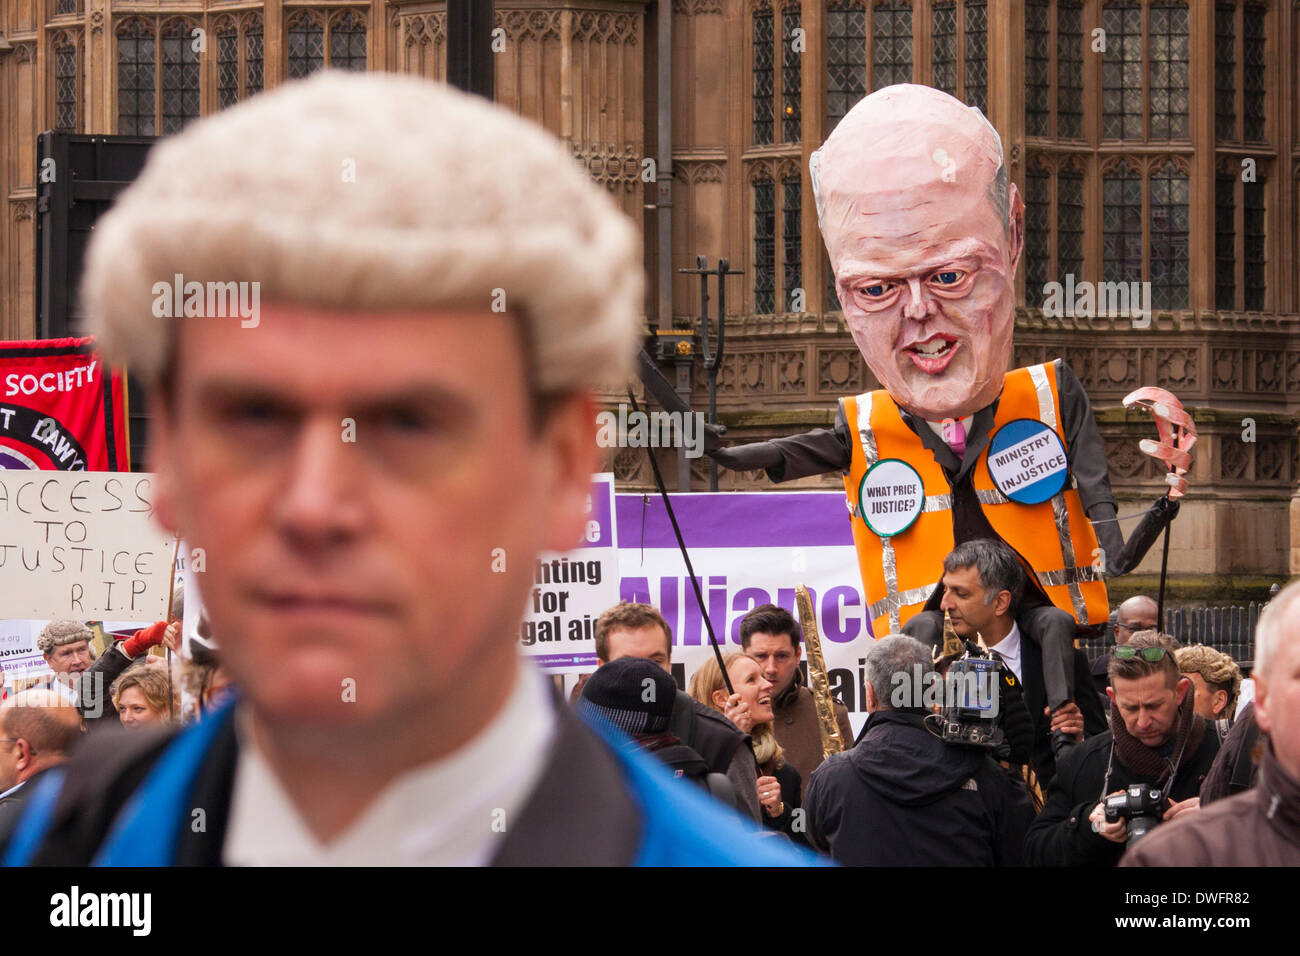 London March 7th 2014. Barristers and solicitors in London begin their march from Parliament to the Justice Ministry during their walk out in protest against further cuts of £215 million to the legal aid budget, and a reduction by a third of duty lawyers' contracts. Credit:  Paul Davey/Alamy Live News Stock Photo